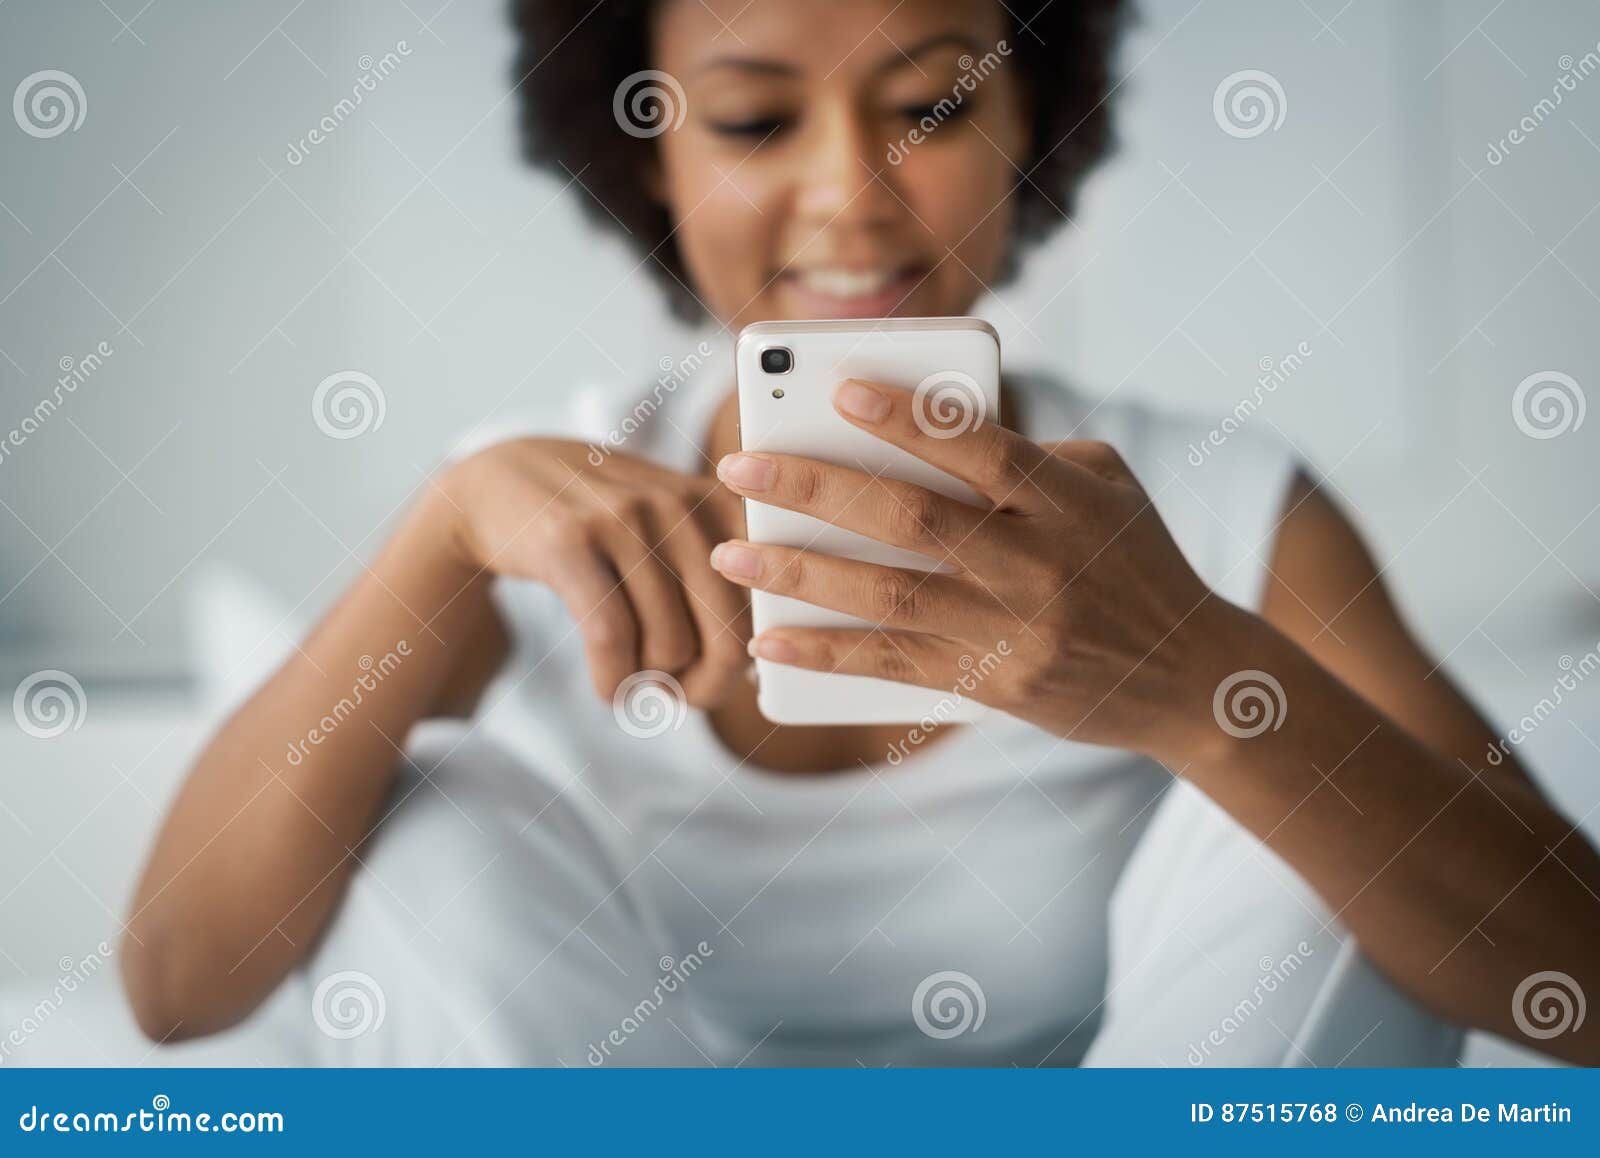 woman texting with her smartphone